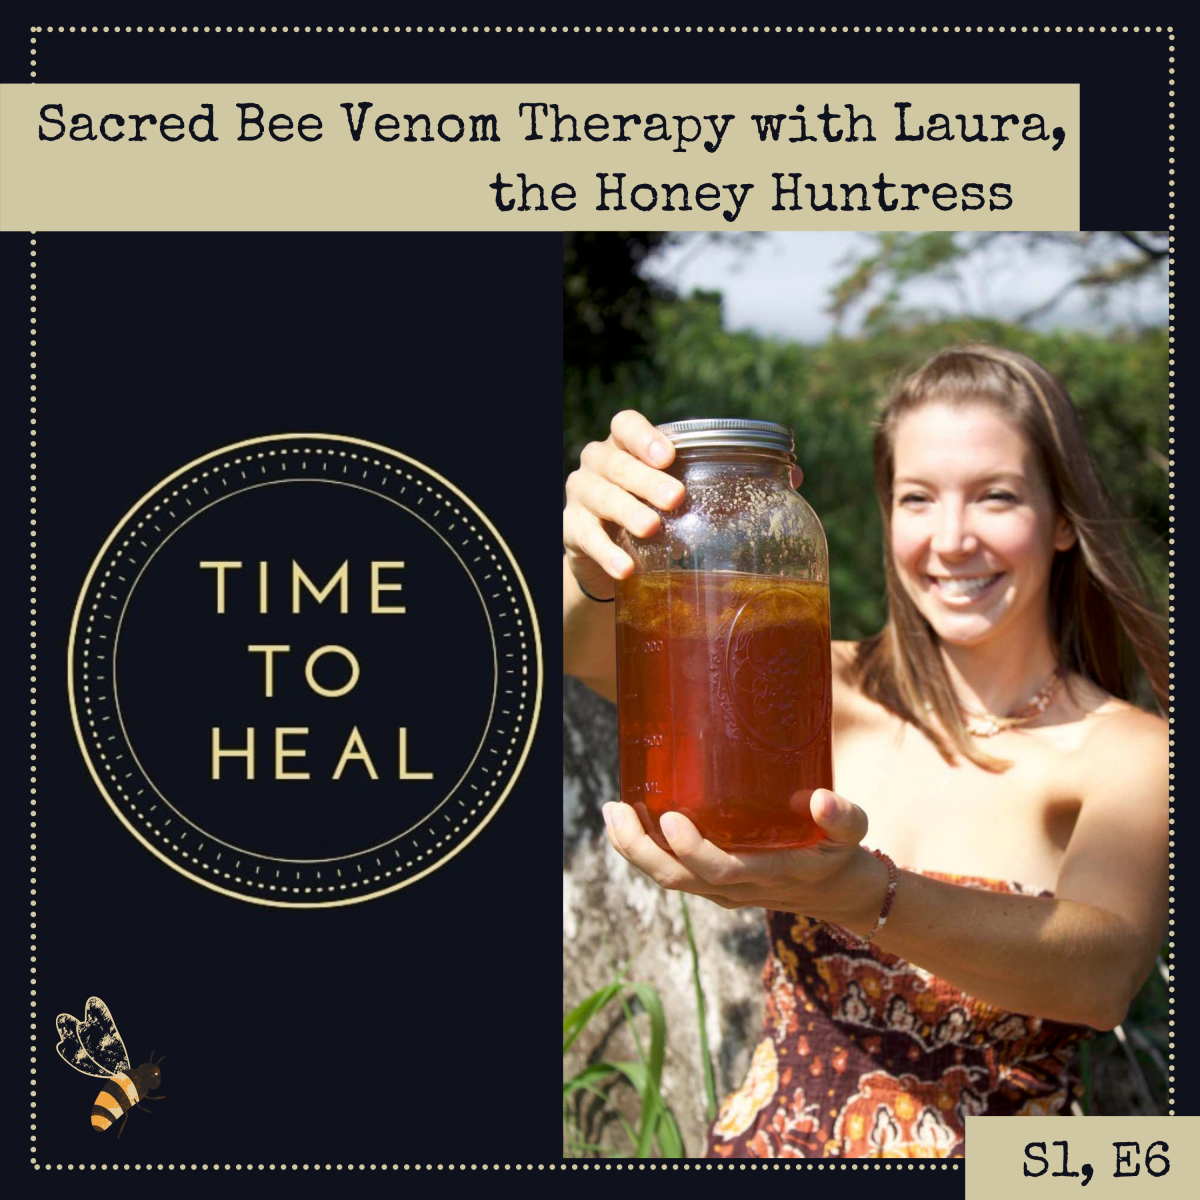 Sacred Bee Venom Therapy with Laura, the Honey Huntress